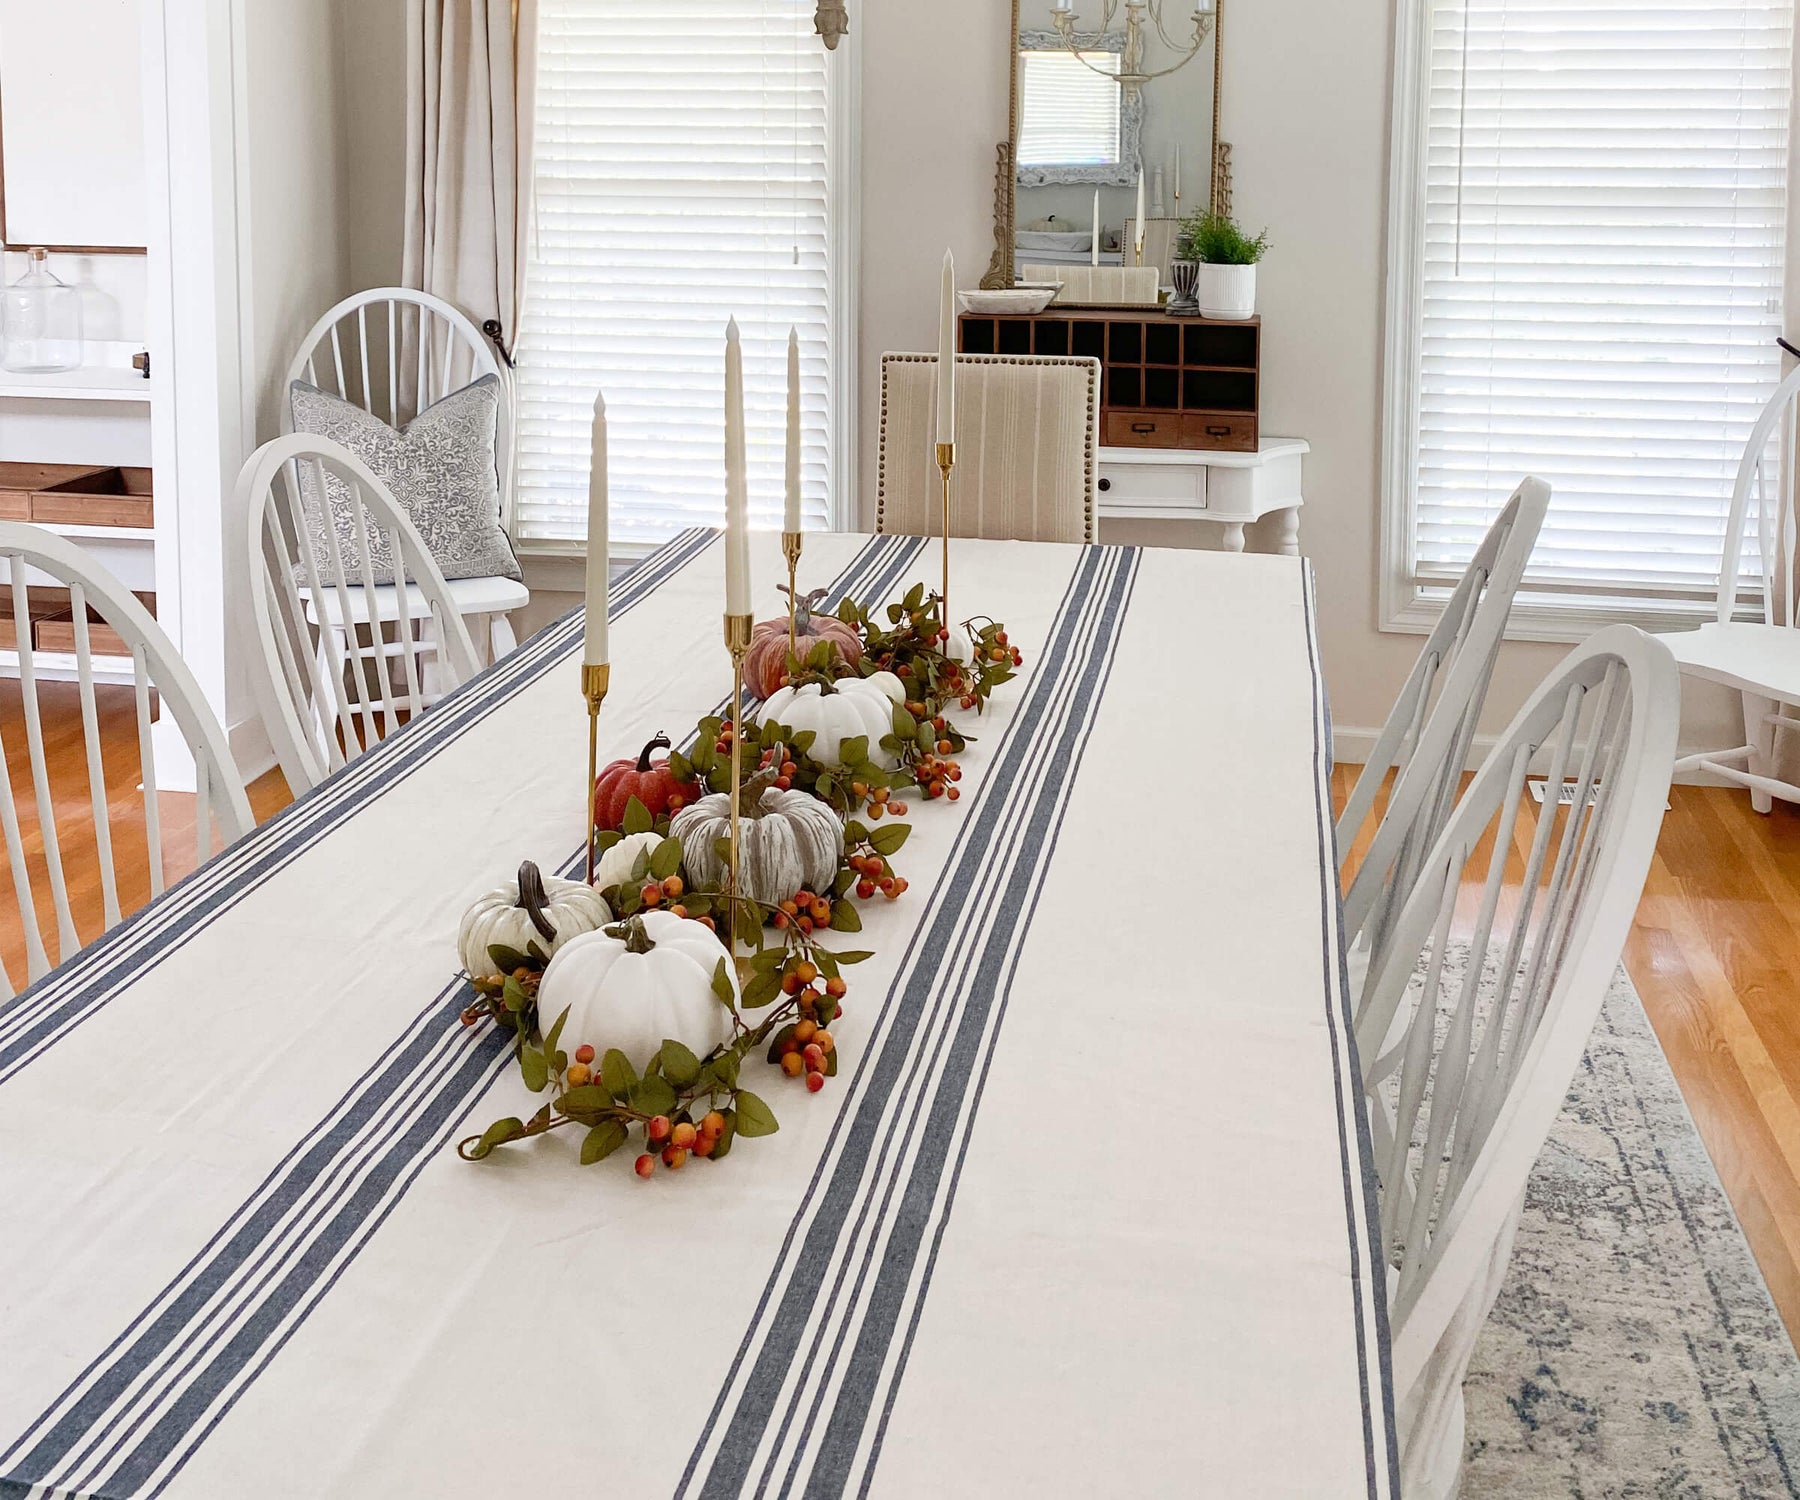 Dining table with white chairs and a striped Farmhouse tablecloth